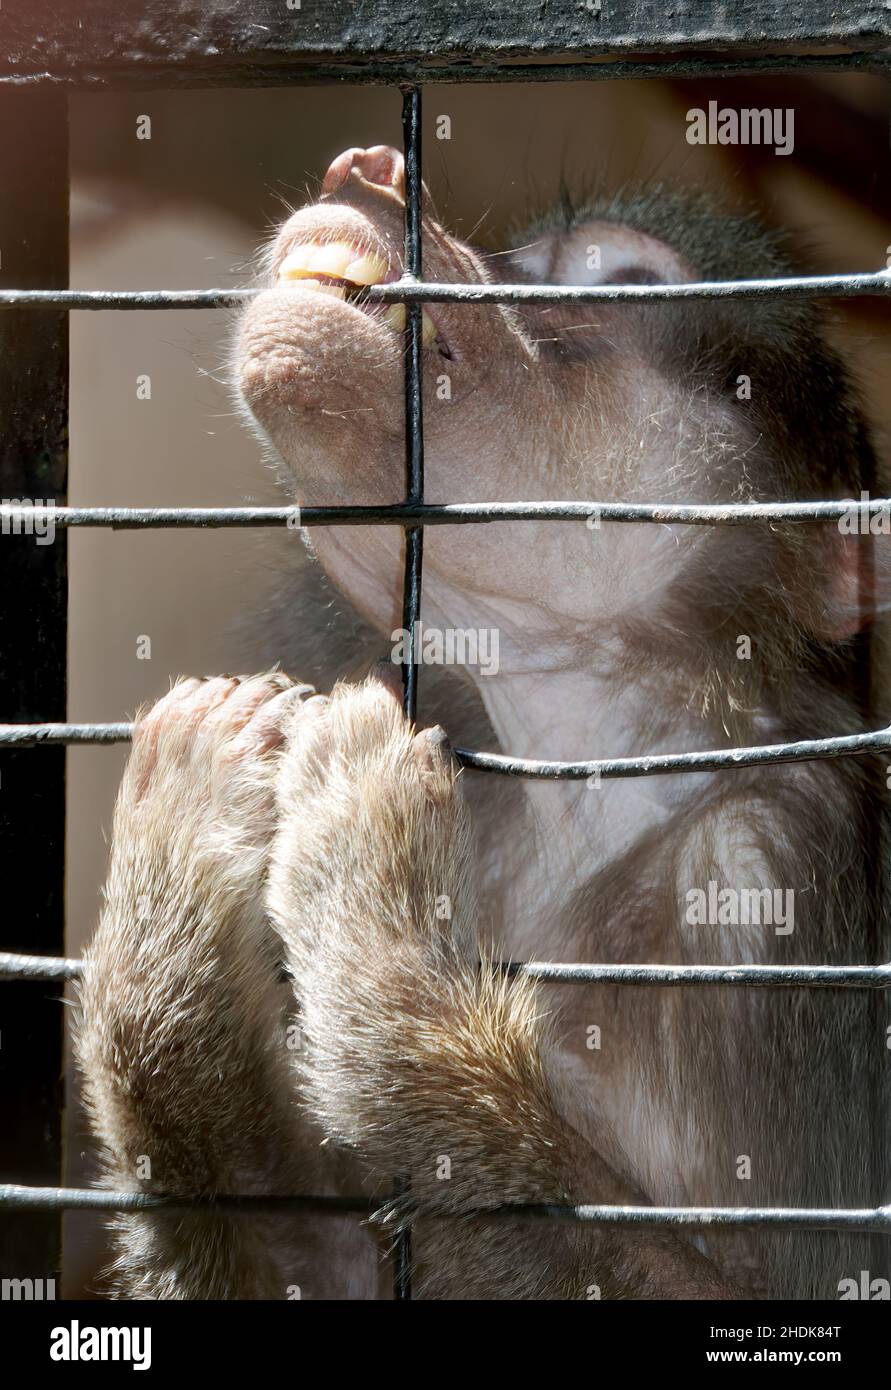 Caged monkey holding on to the cage bars, biting. Stock Photo